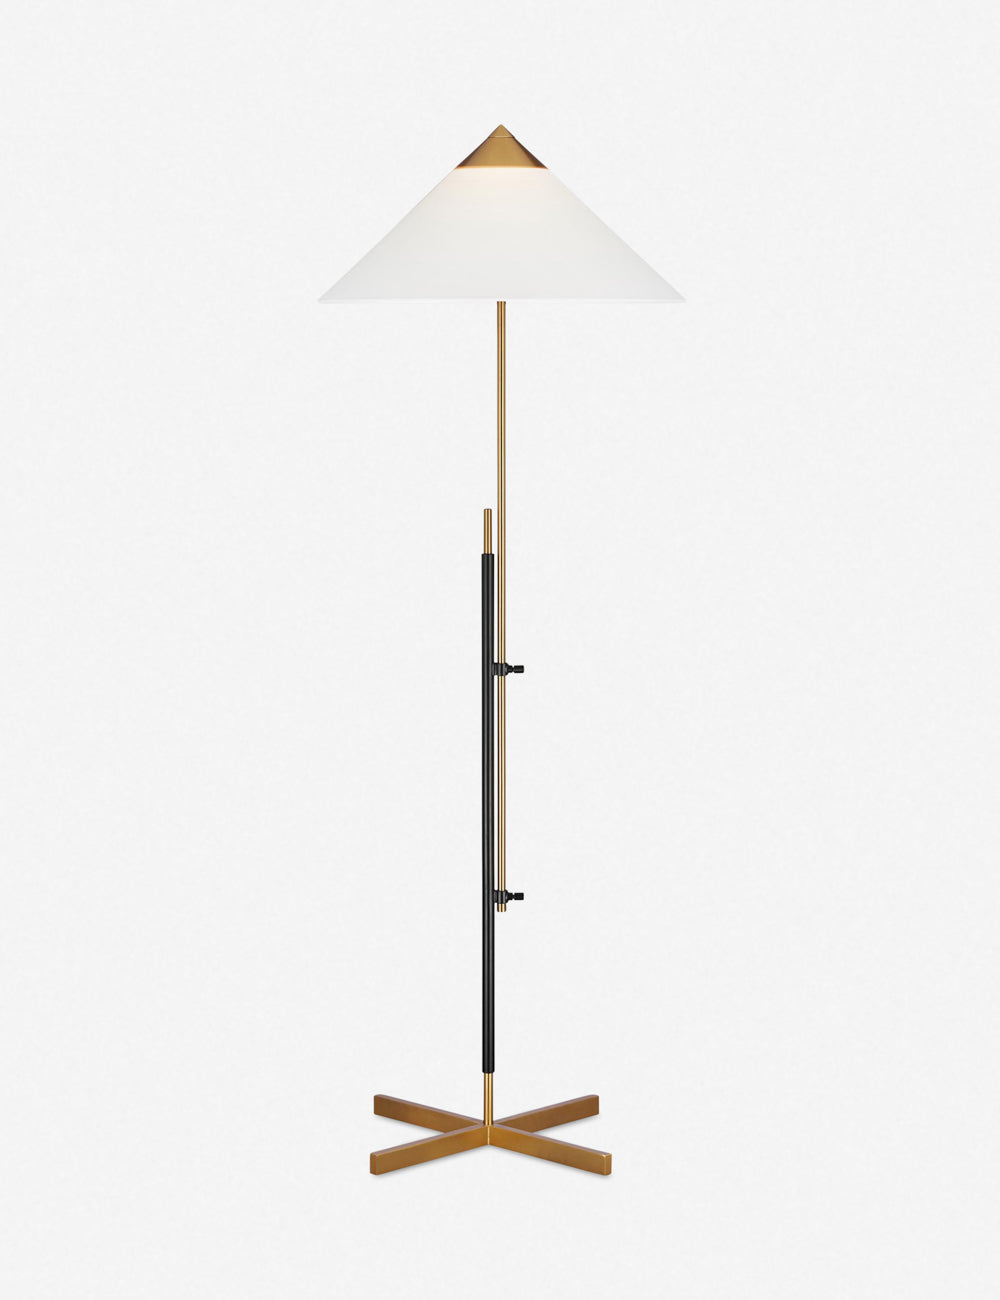 Adjustable Franklin Pharmacy Floor Lamp in Burnished Brass and Deep Bronze